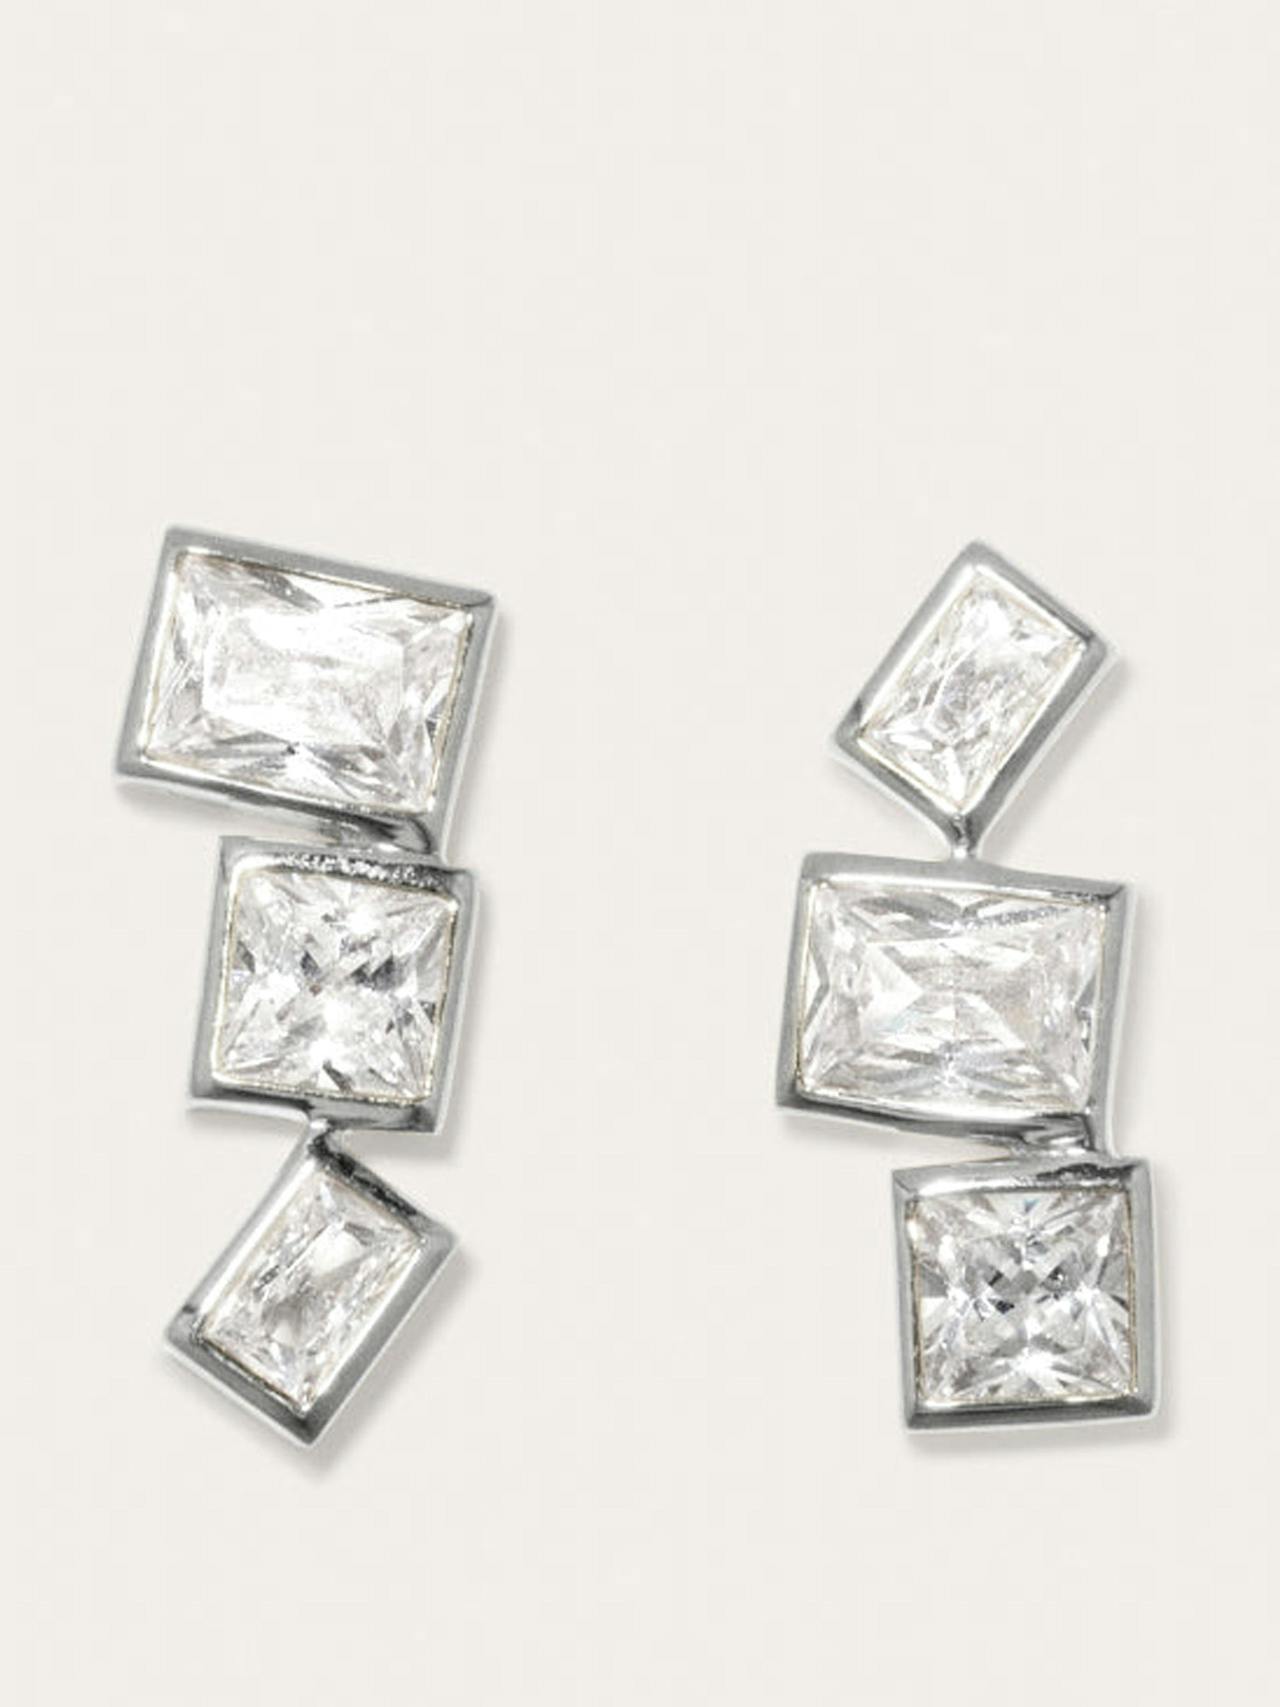 "How to Get a Low Score at Tetris" cubic zirconia and recycled silver earrings